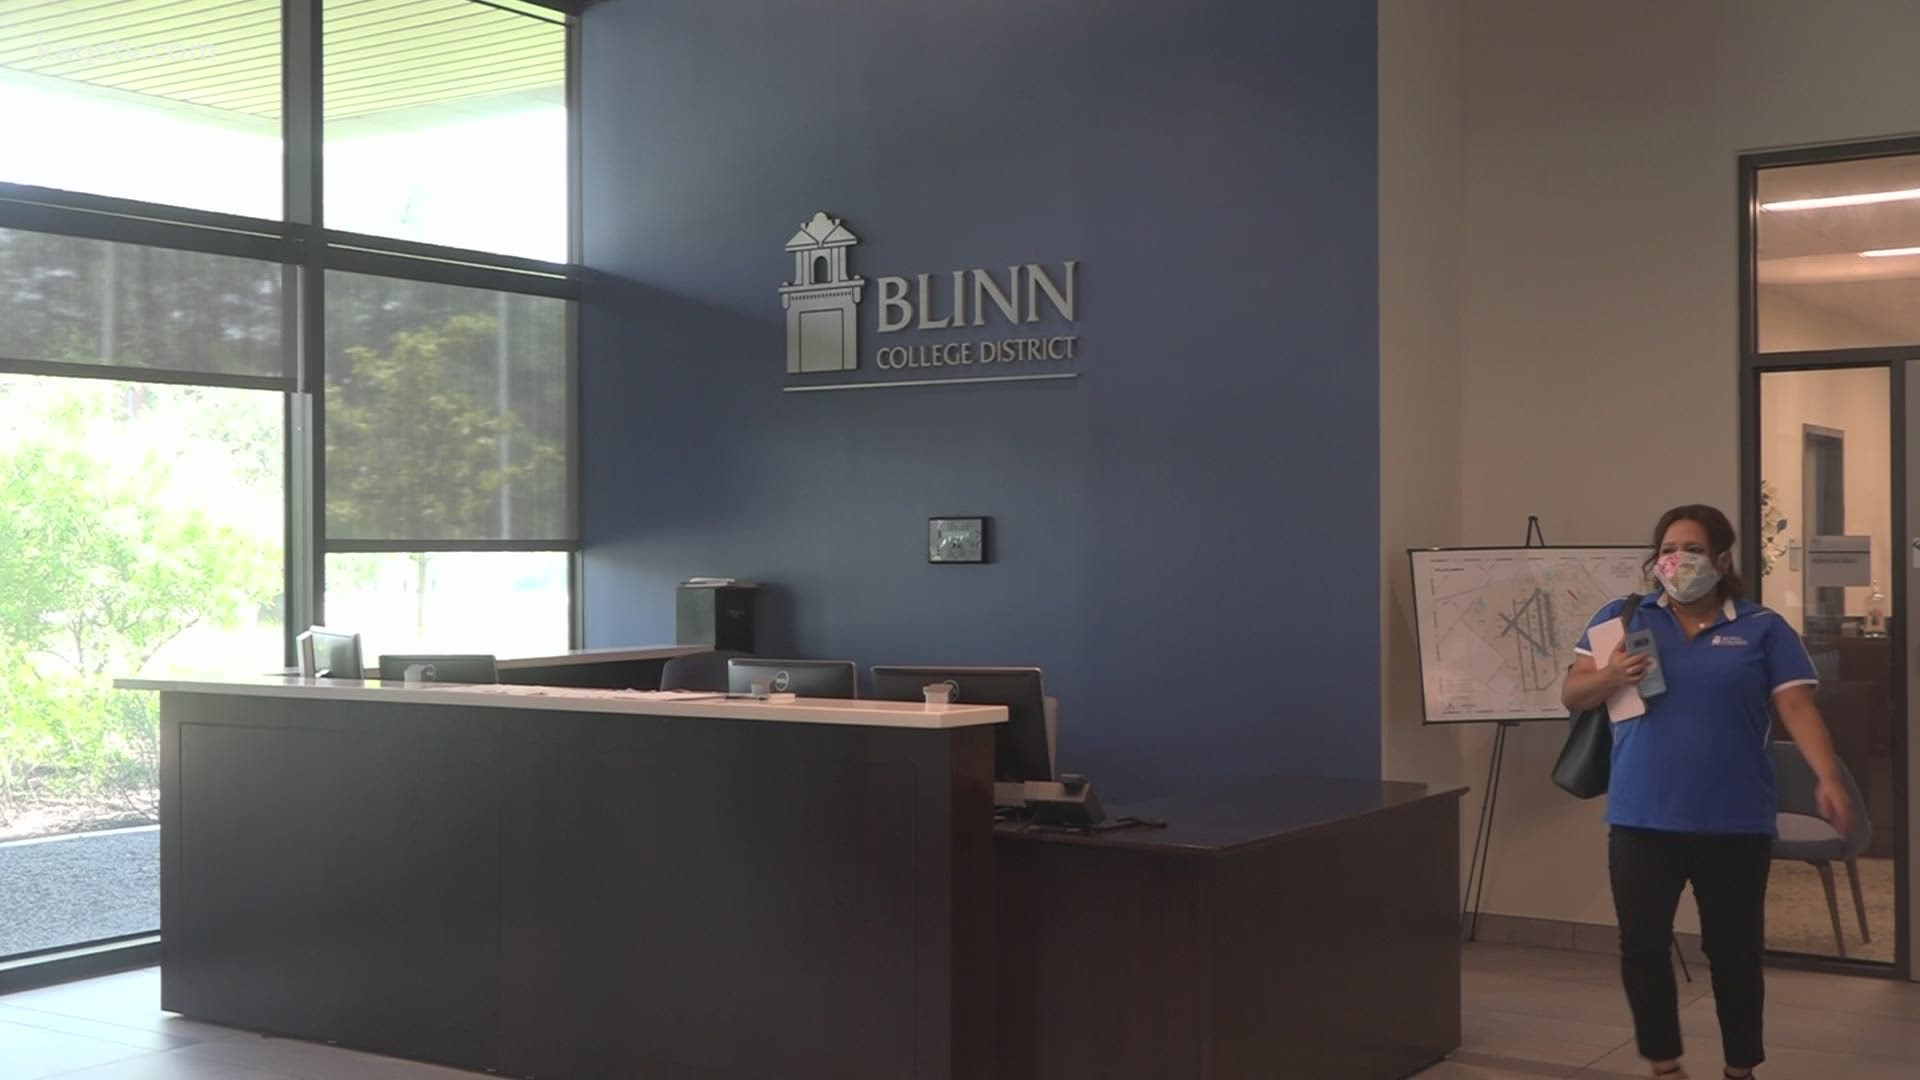 Blinn College said the course formats give students a way to choose a learning style and schedule that works best for them.